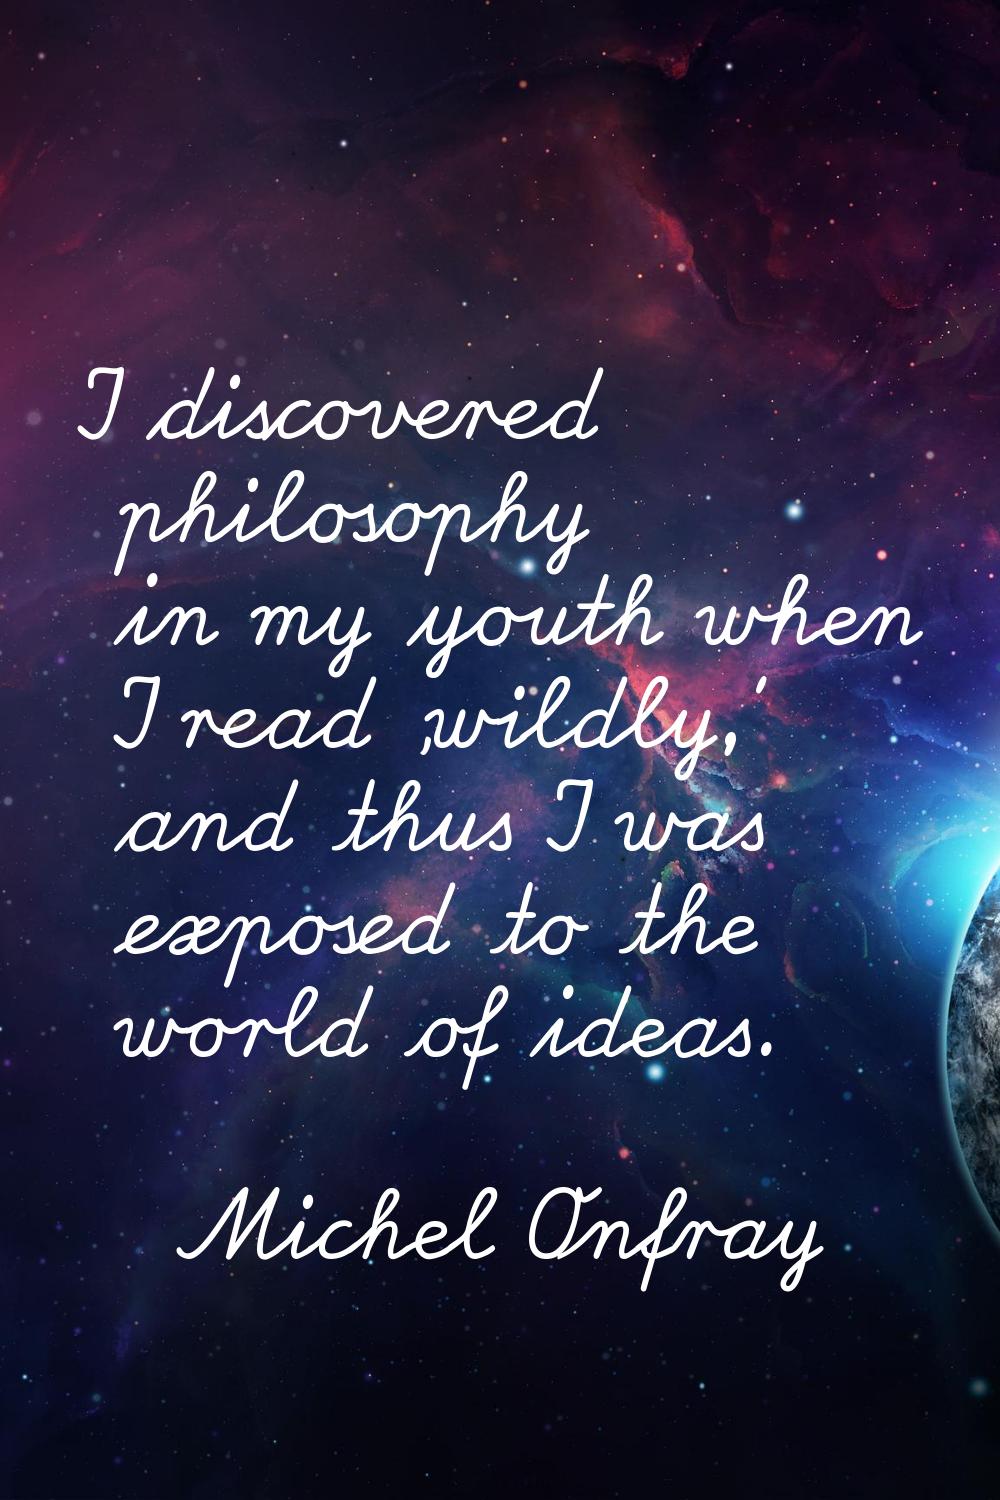 I discovered philosophy in my youth when I read 'wildly,' and thus I was exposed to the world of id